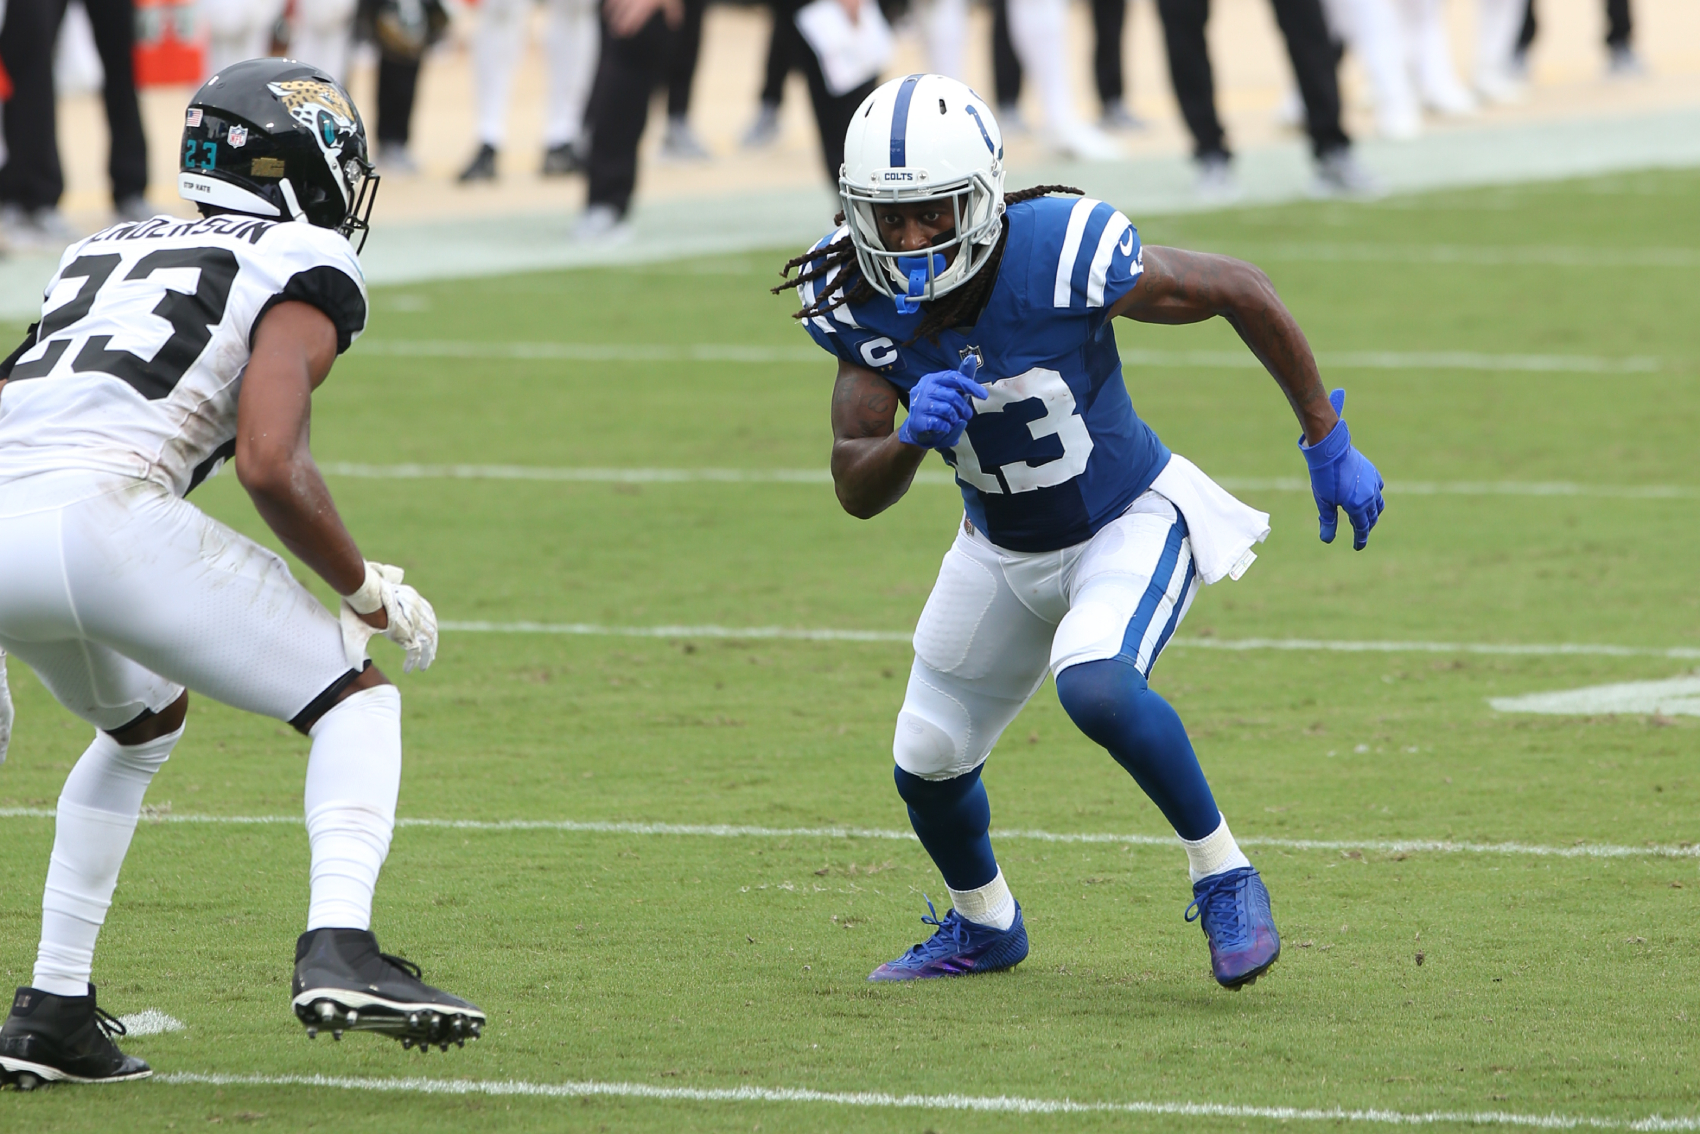 T.Y. Hilton has been extremely reliable for the Colts. After some disappointing performances this year, though, his grandma gave him a call.